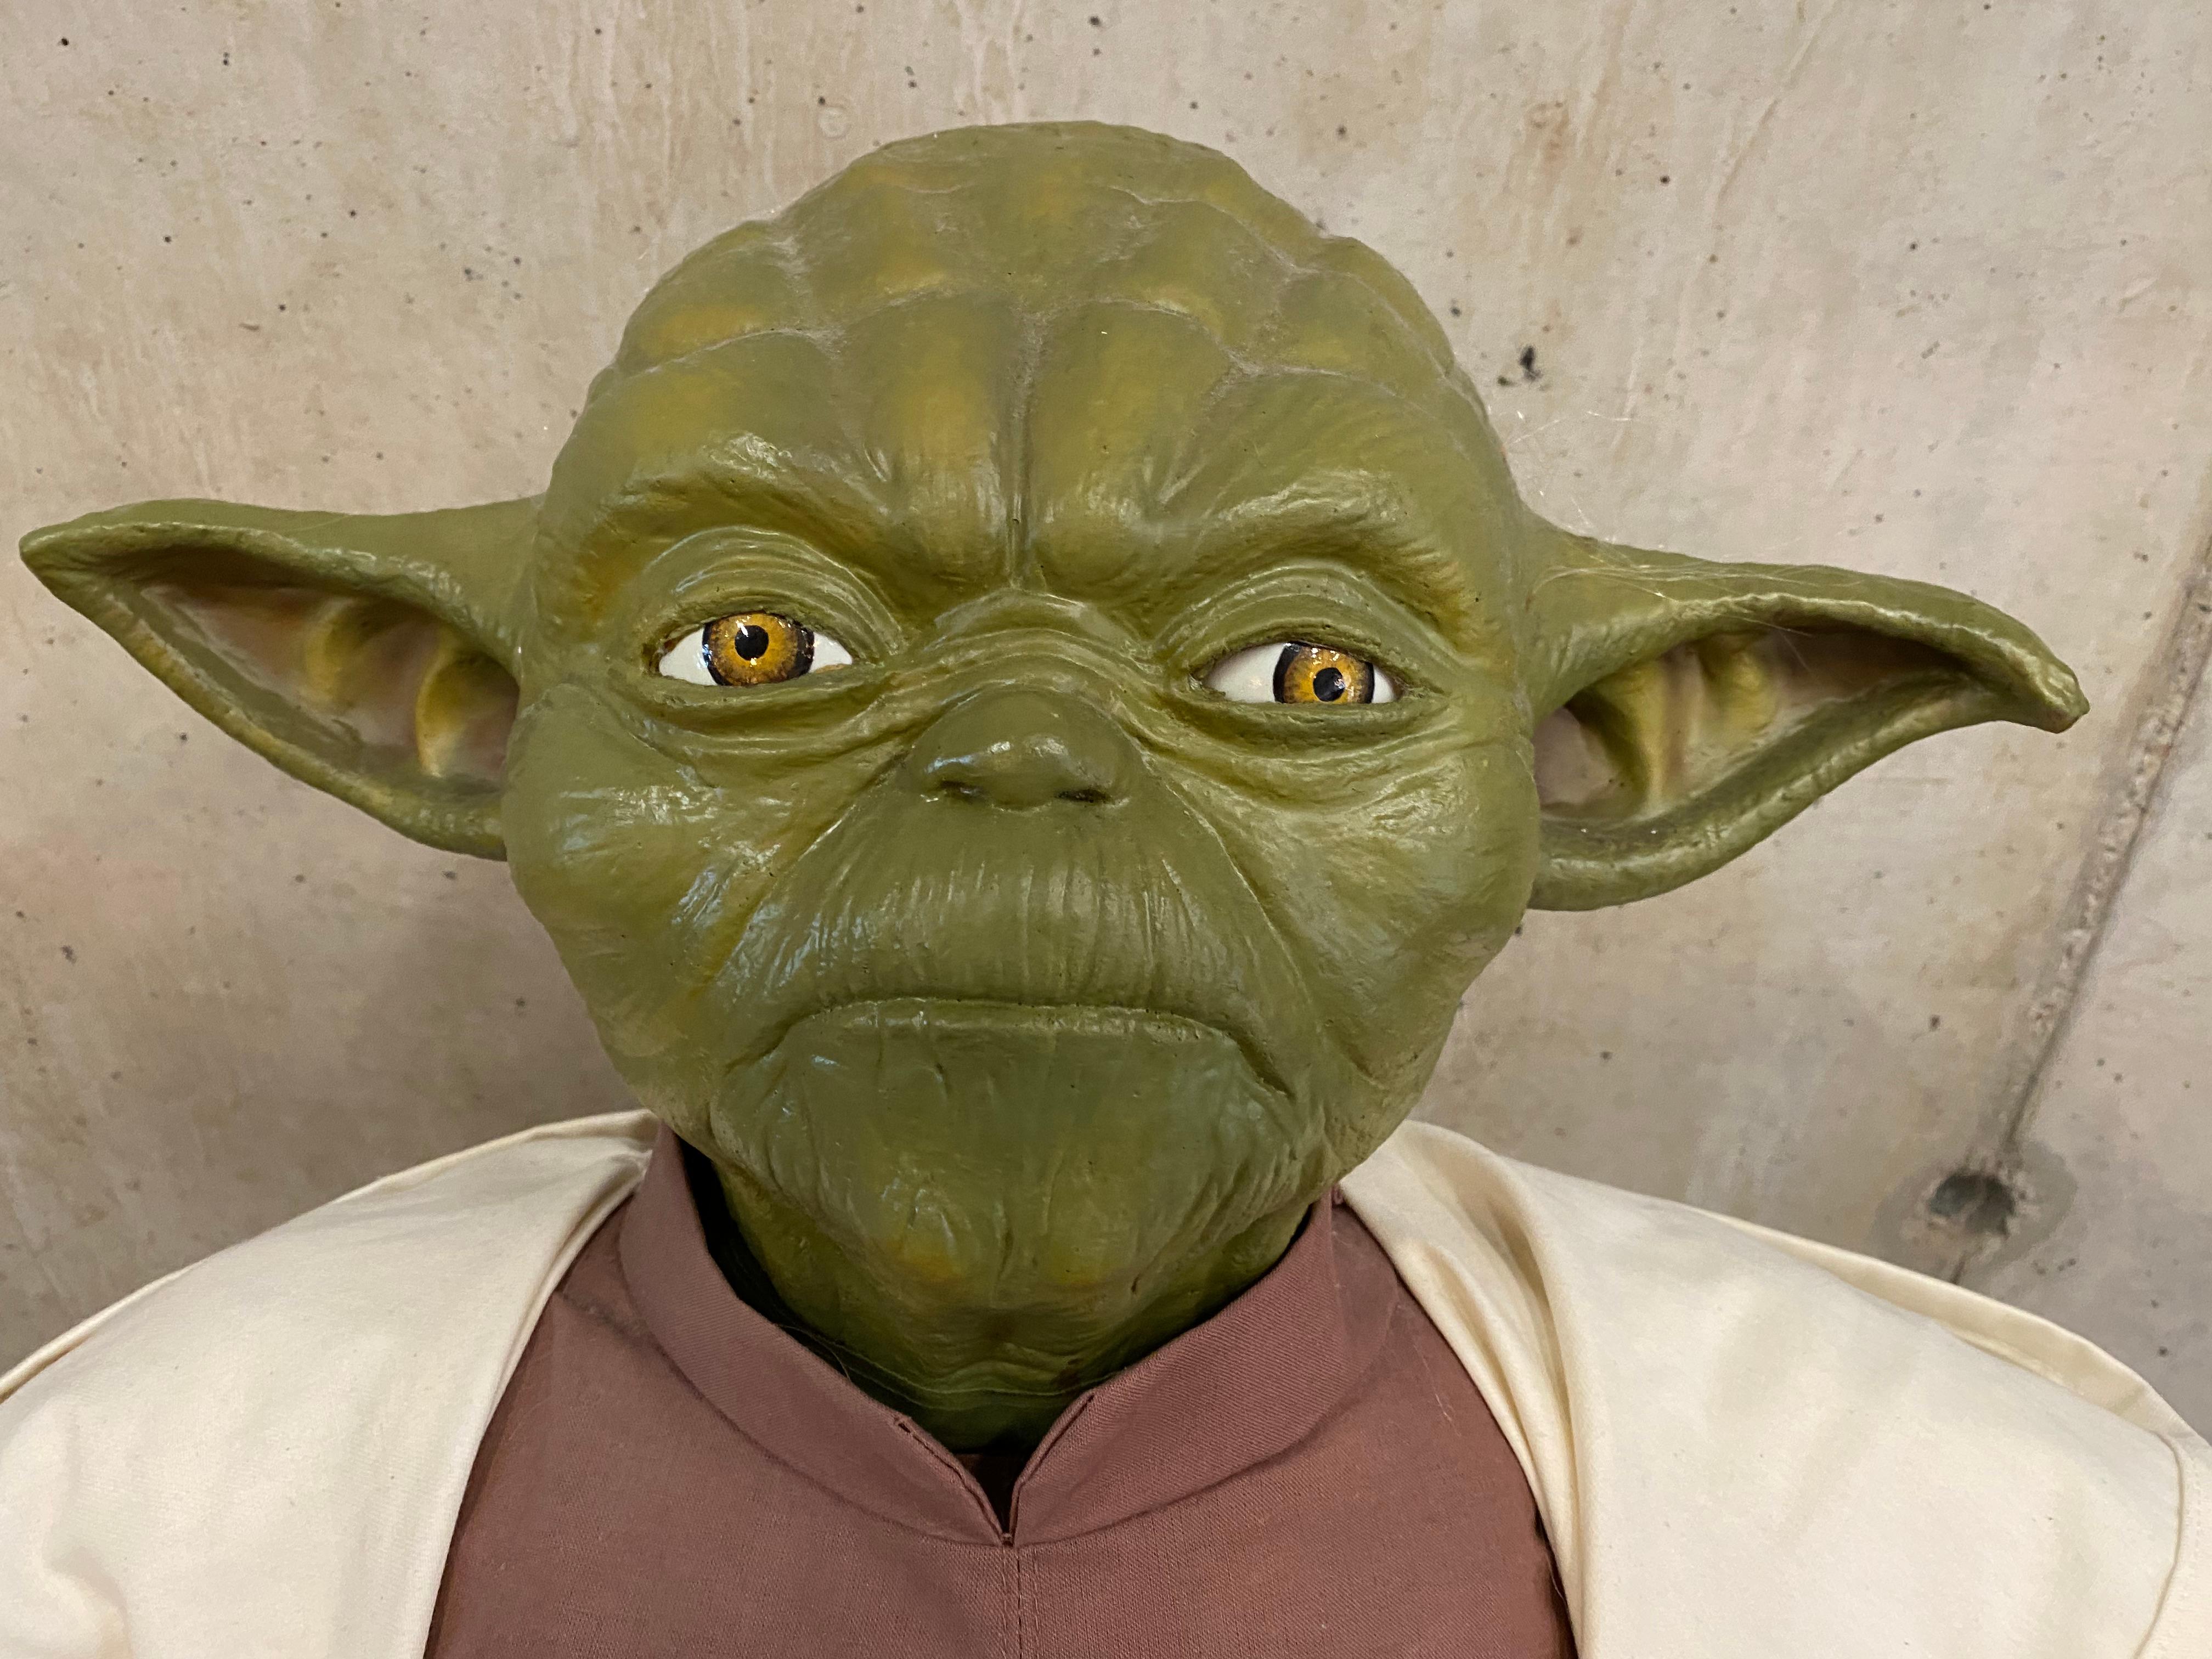 Life Size Yoda Figure, Edition of 50, Could Be Star Wars Photo Requisite For Sale 3